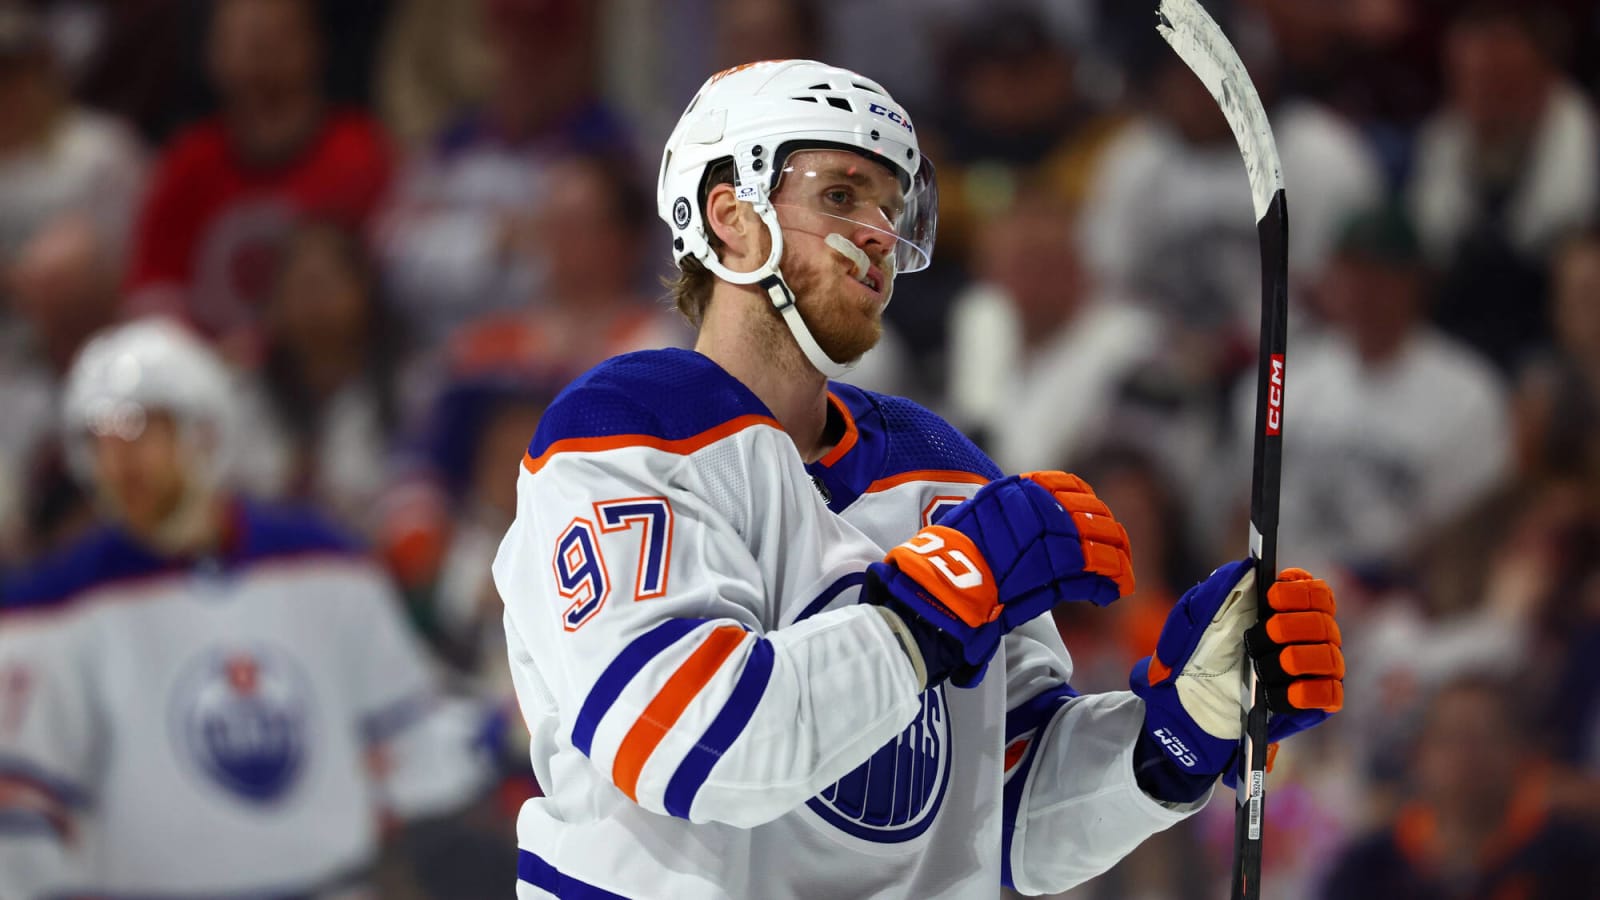 Oilers Lack Momentum Going Into Series Against Kings